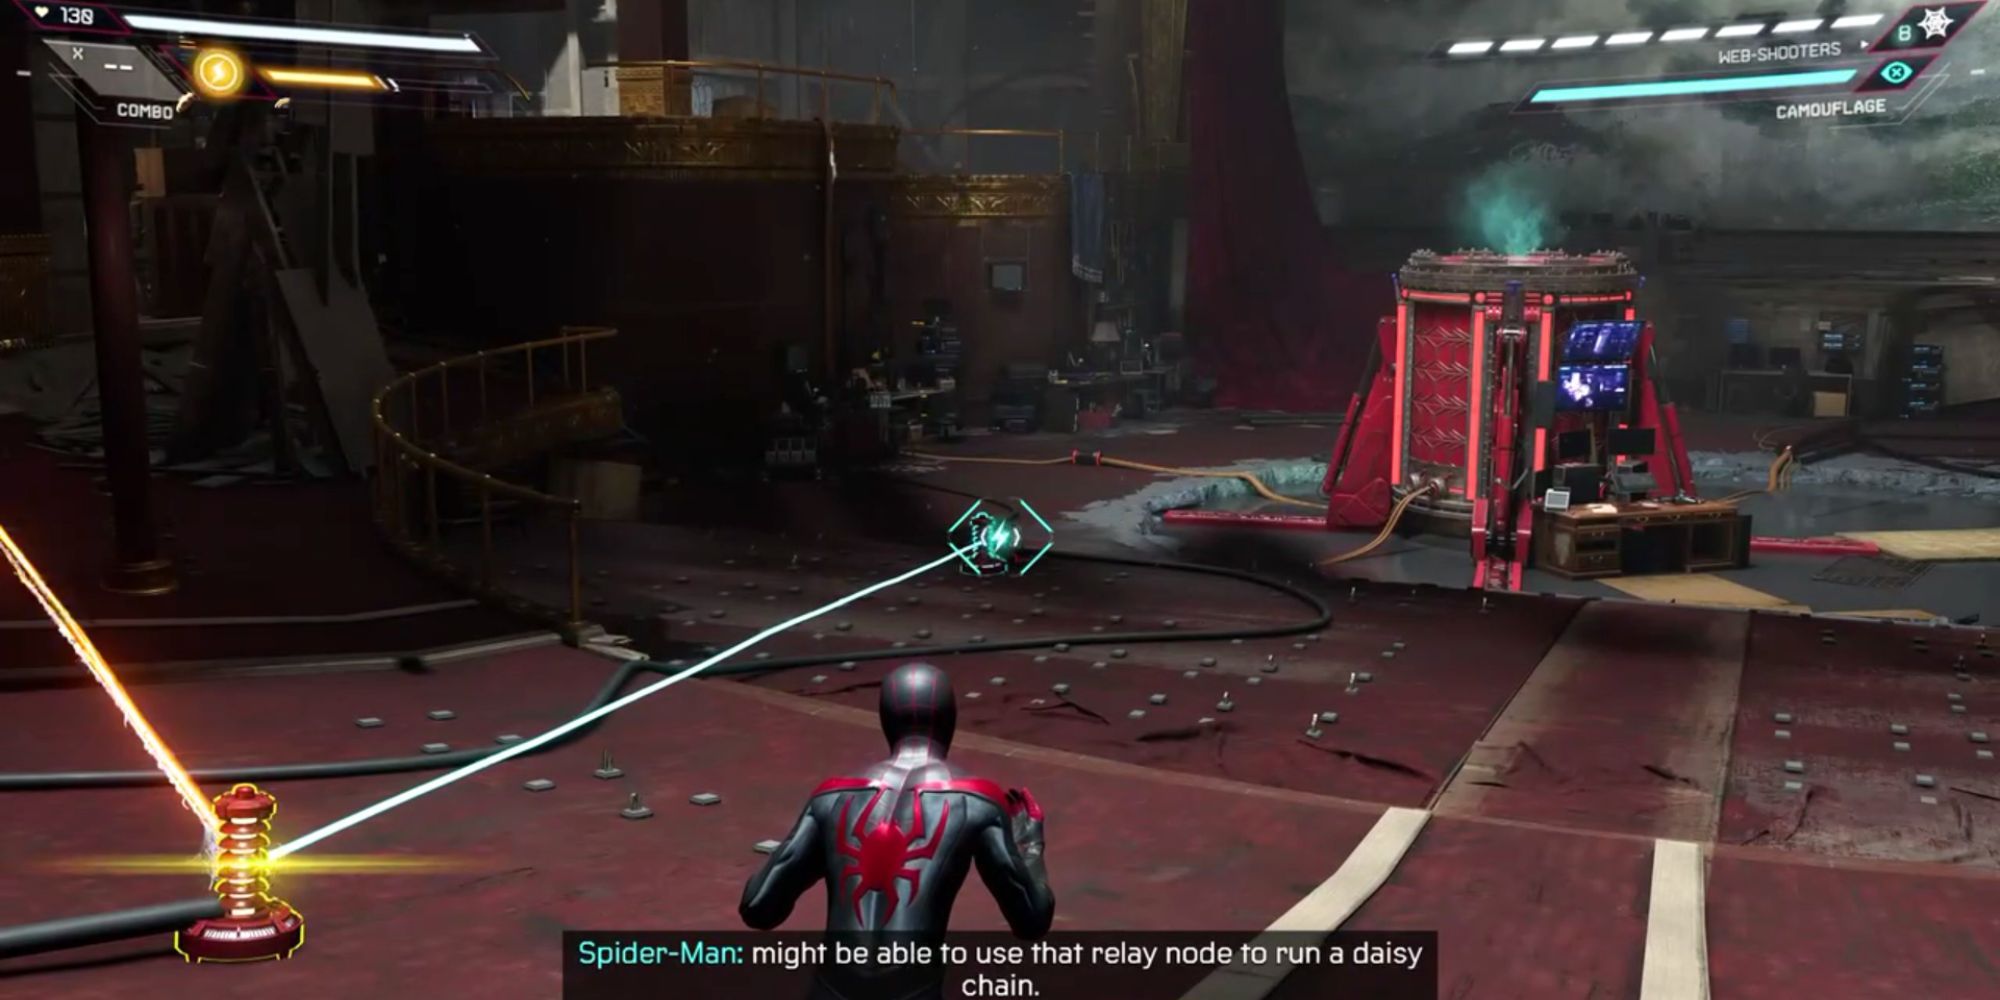 Spider-Man using his webs to conduct electricity in Spider-Man: Miles Morales